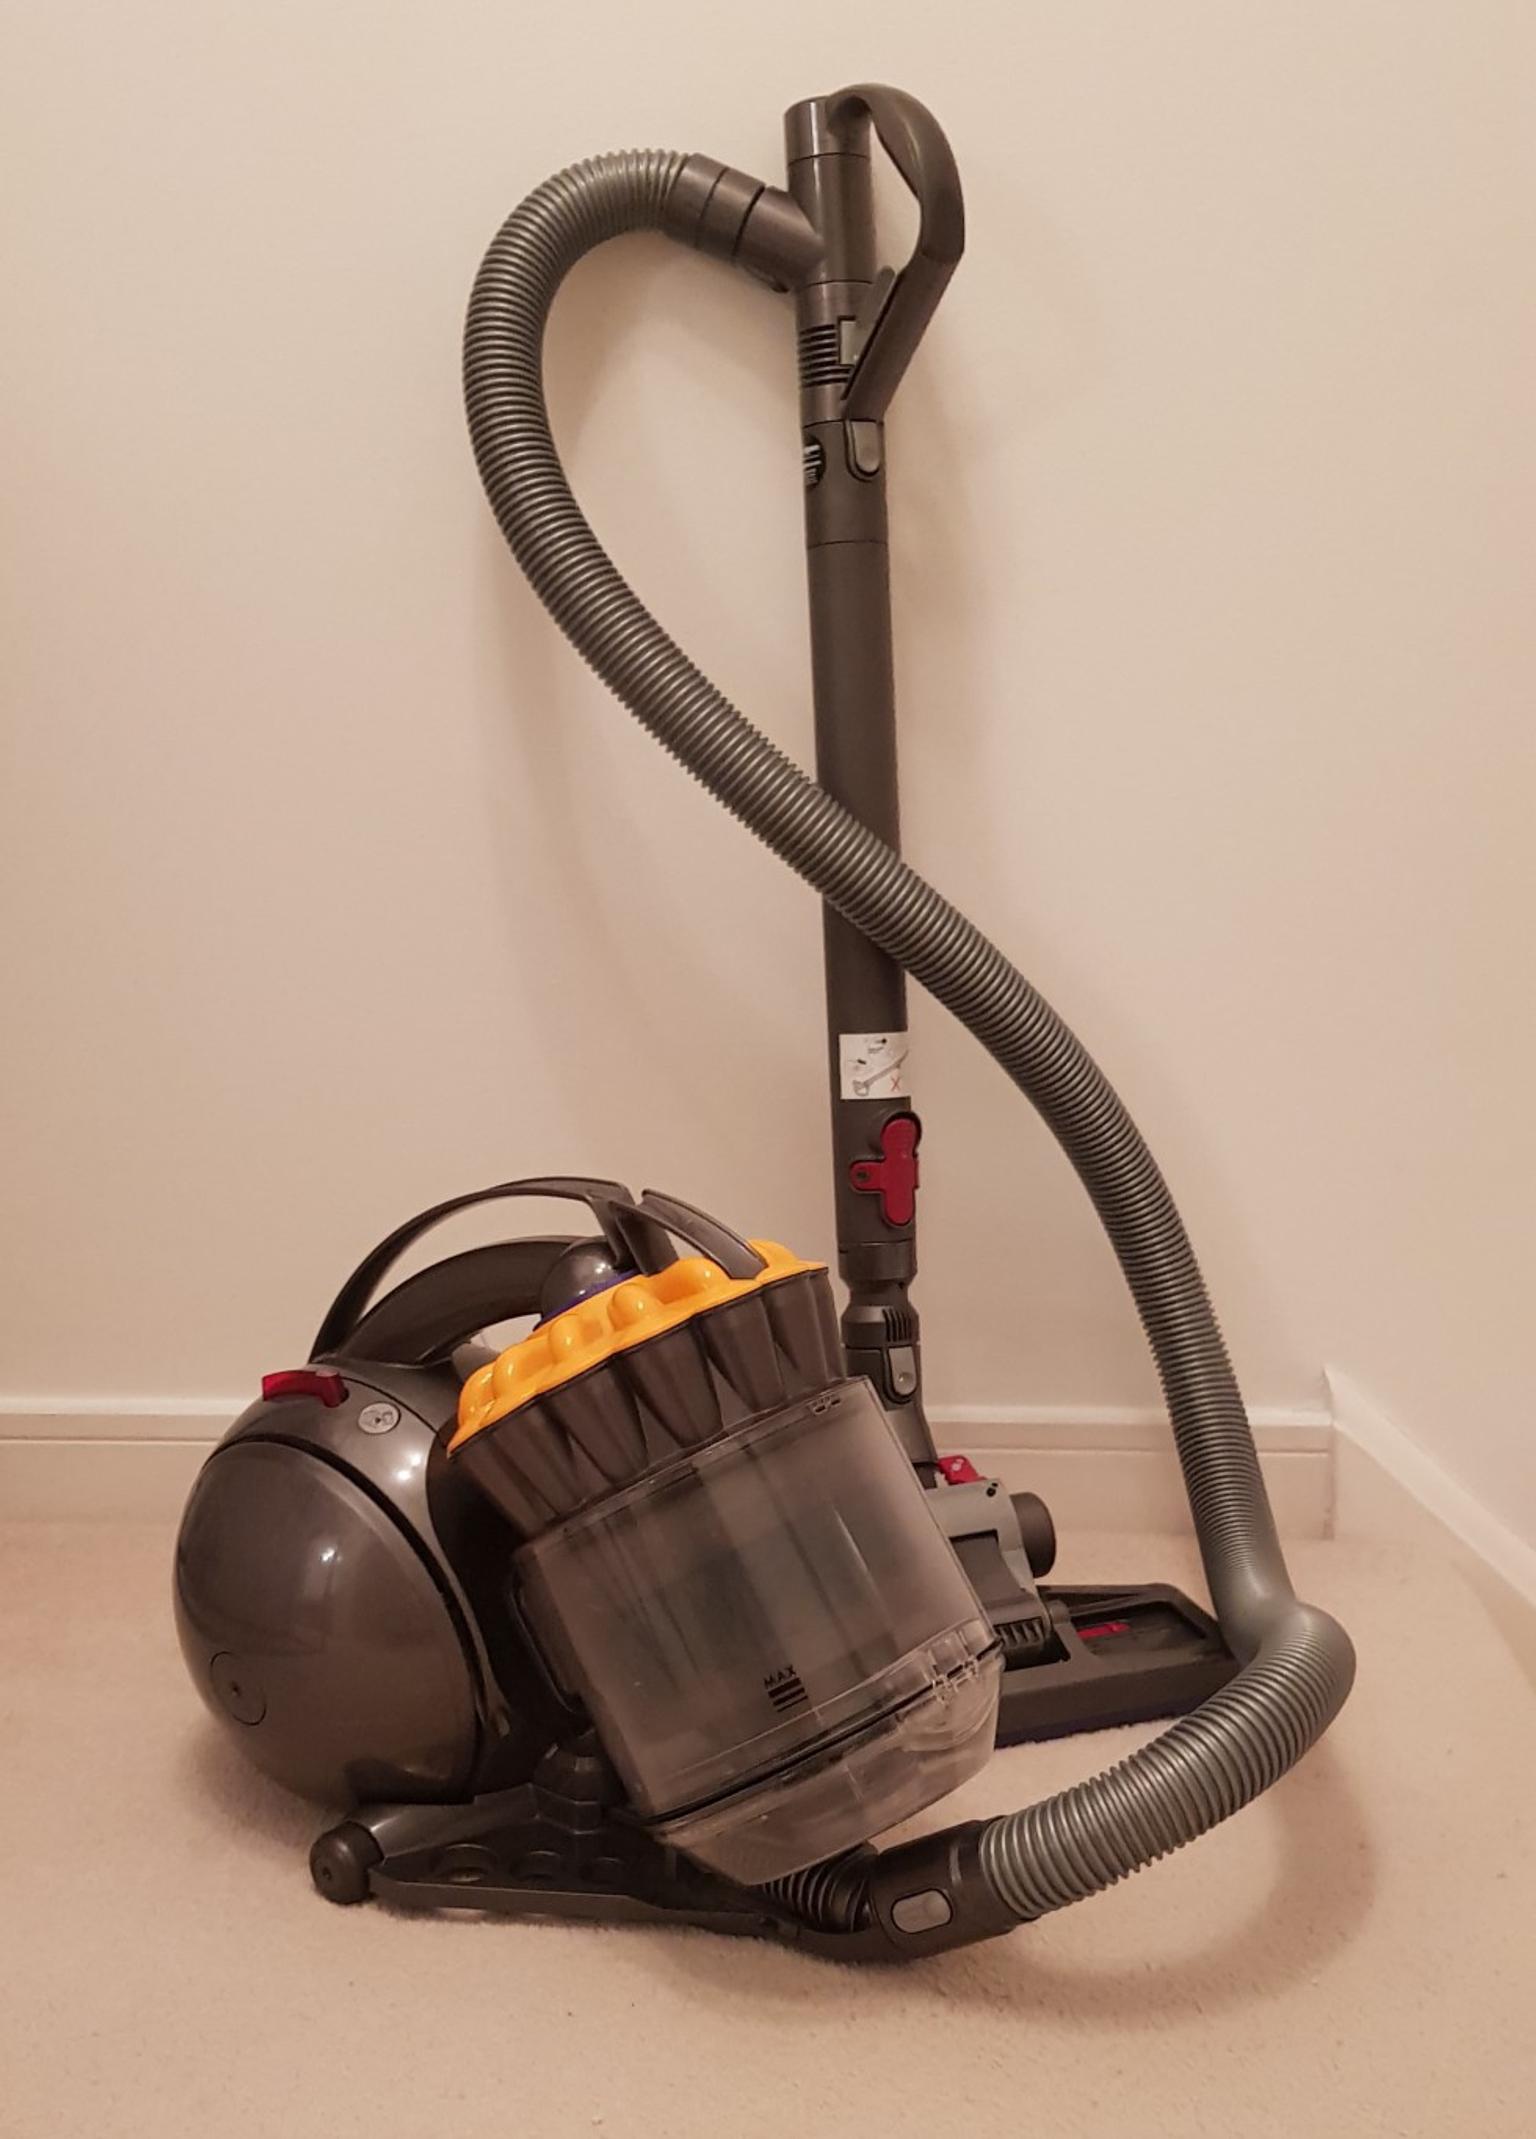 Dyson Dc28c Cylinder Vacuum Cleaner In Rg2 Shinfield Fur 100 00